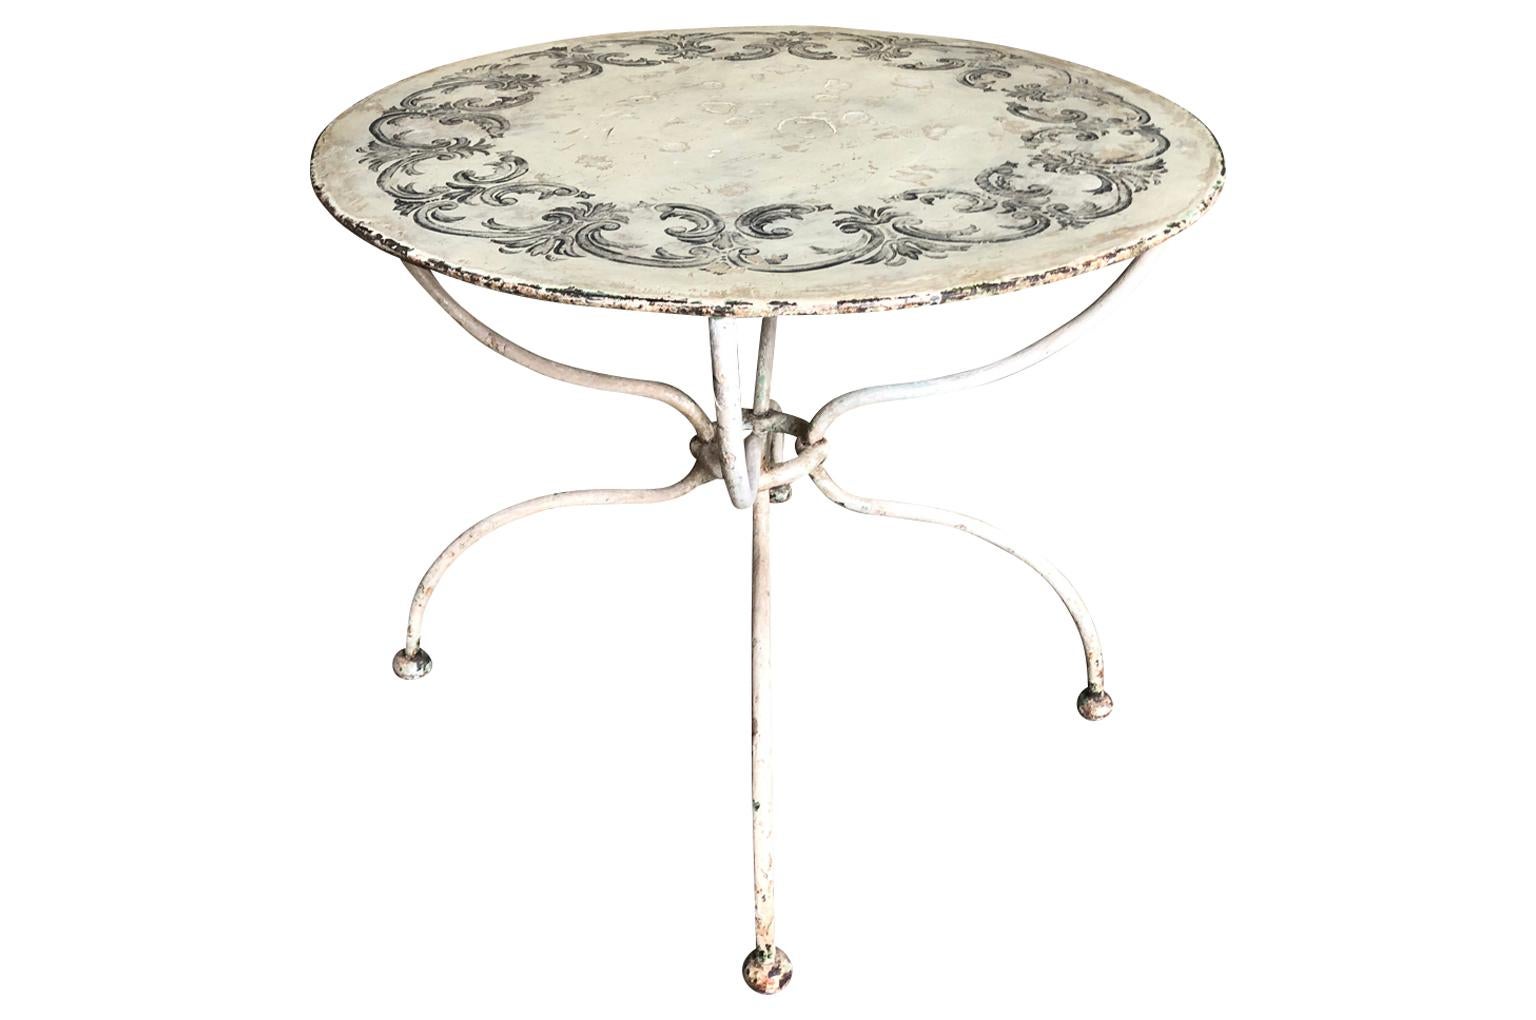 A very lovely later 19th century iron garden table with a fabulous painted finish. Perfect for any interior or garden.